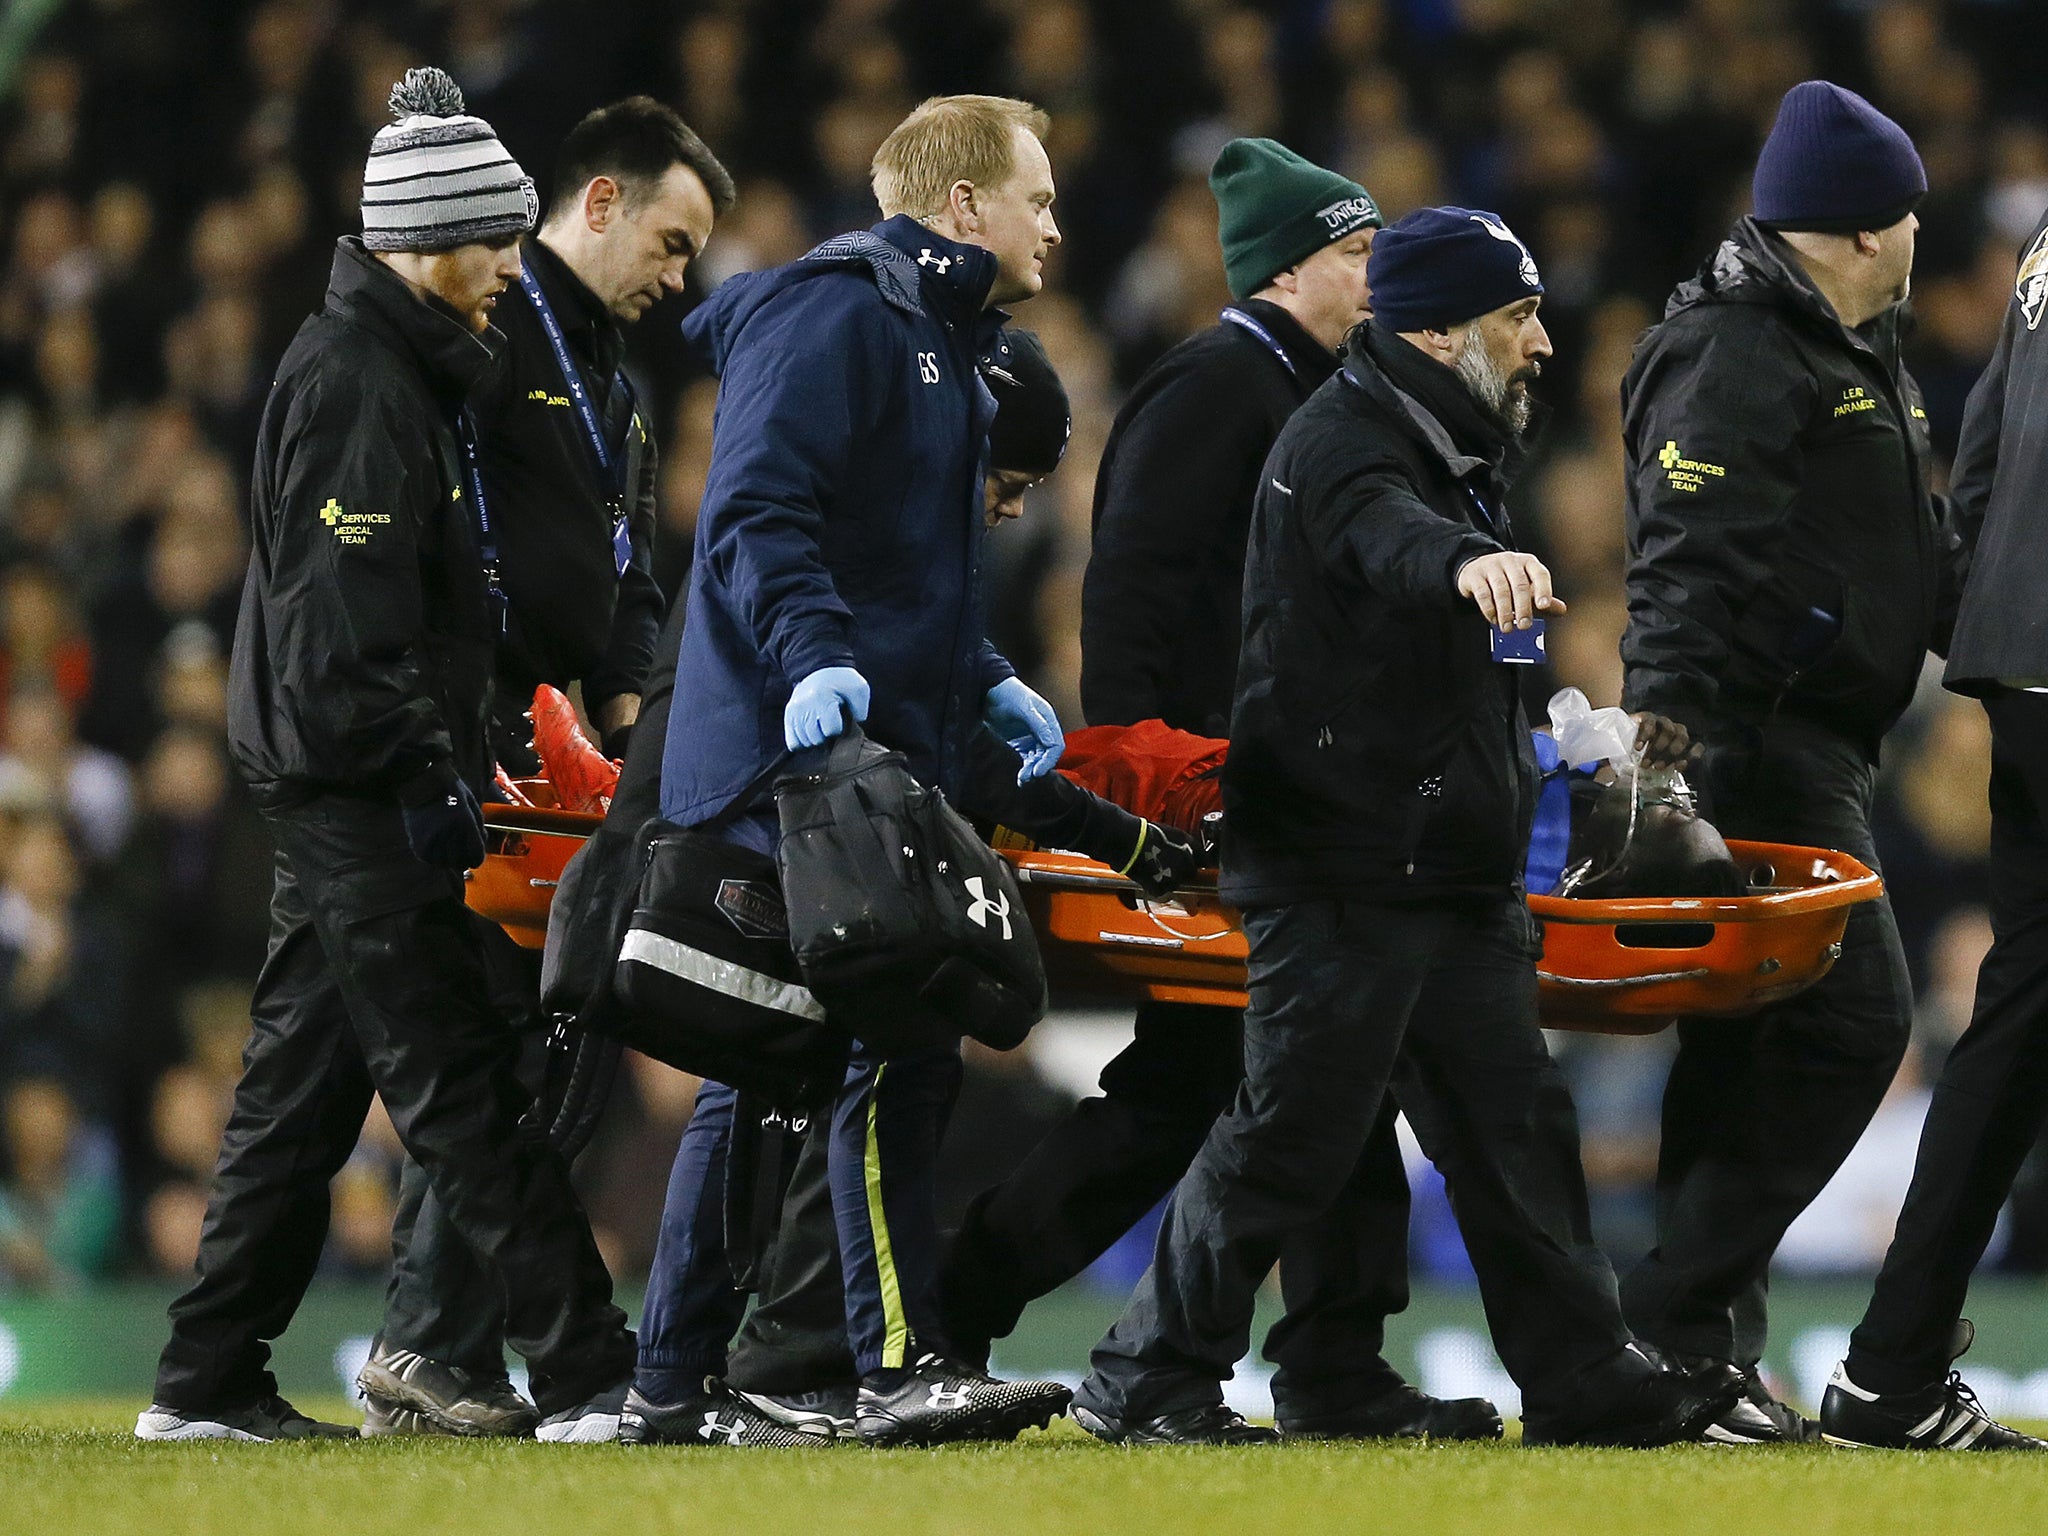 Swansea's Bafetimbi Gomis is carried off the pitch on a stretcher